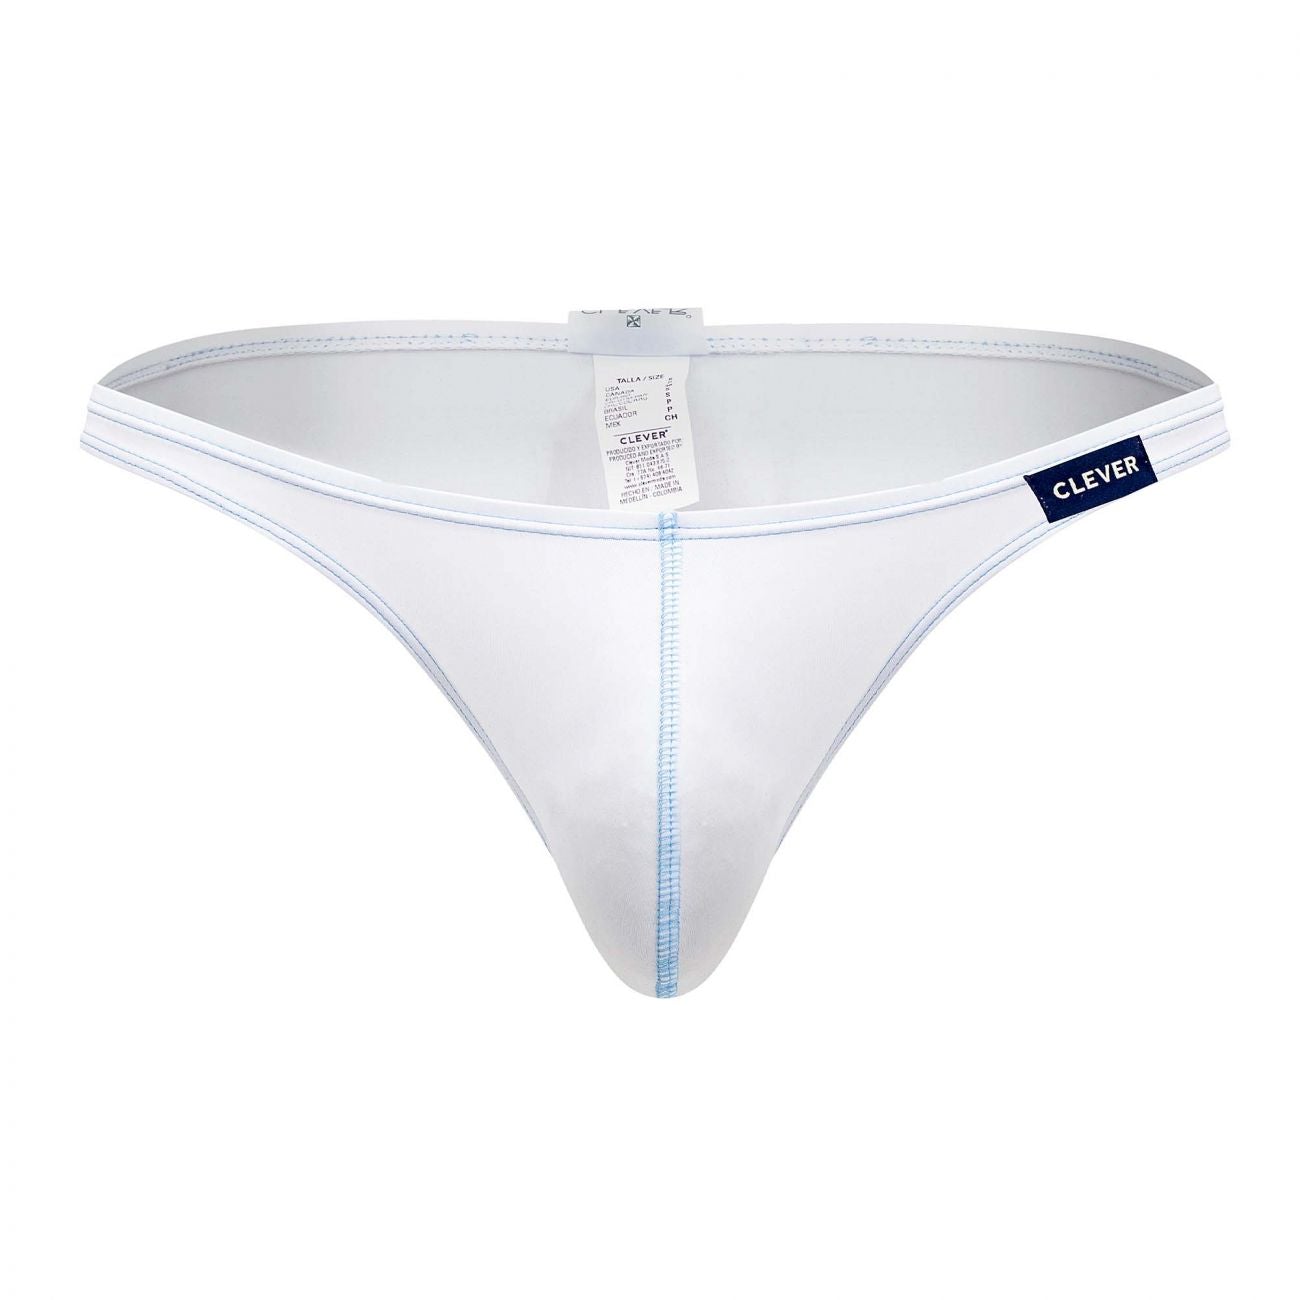 Clever 0663-1 Rest Thongs White